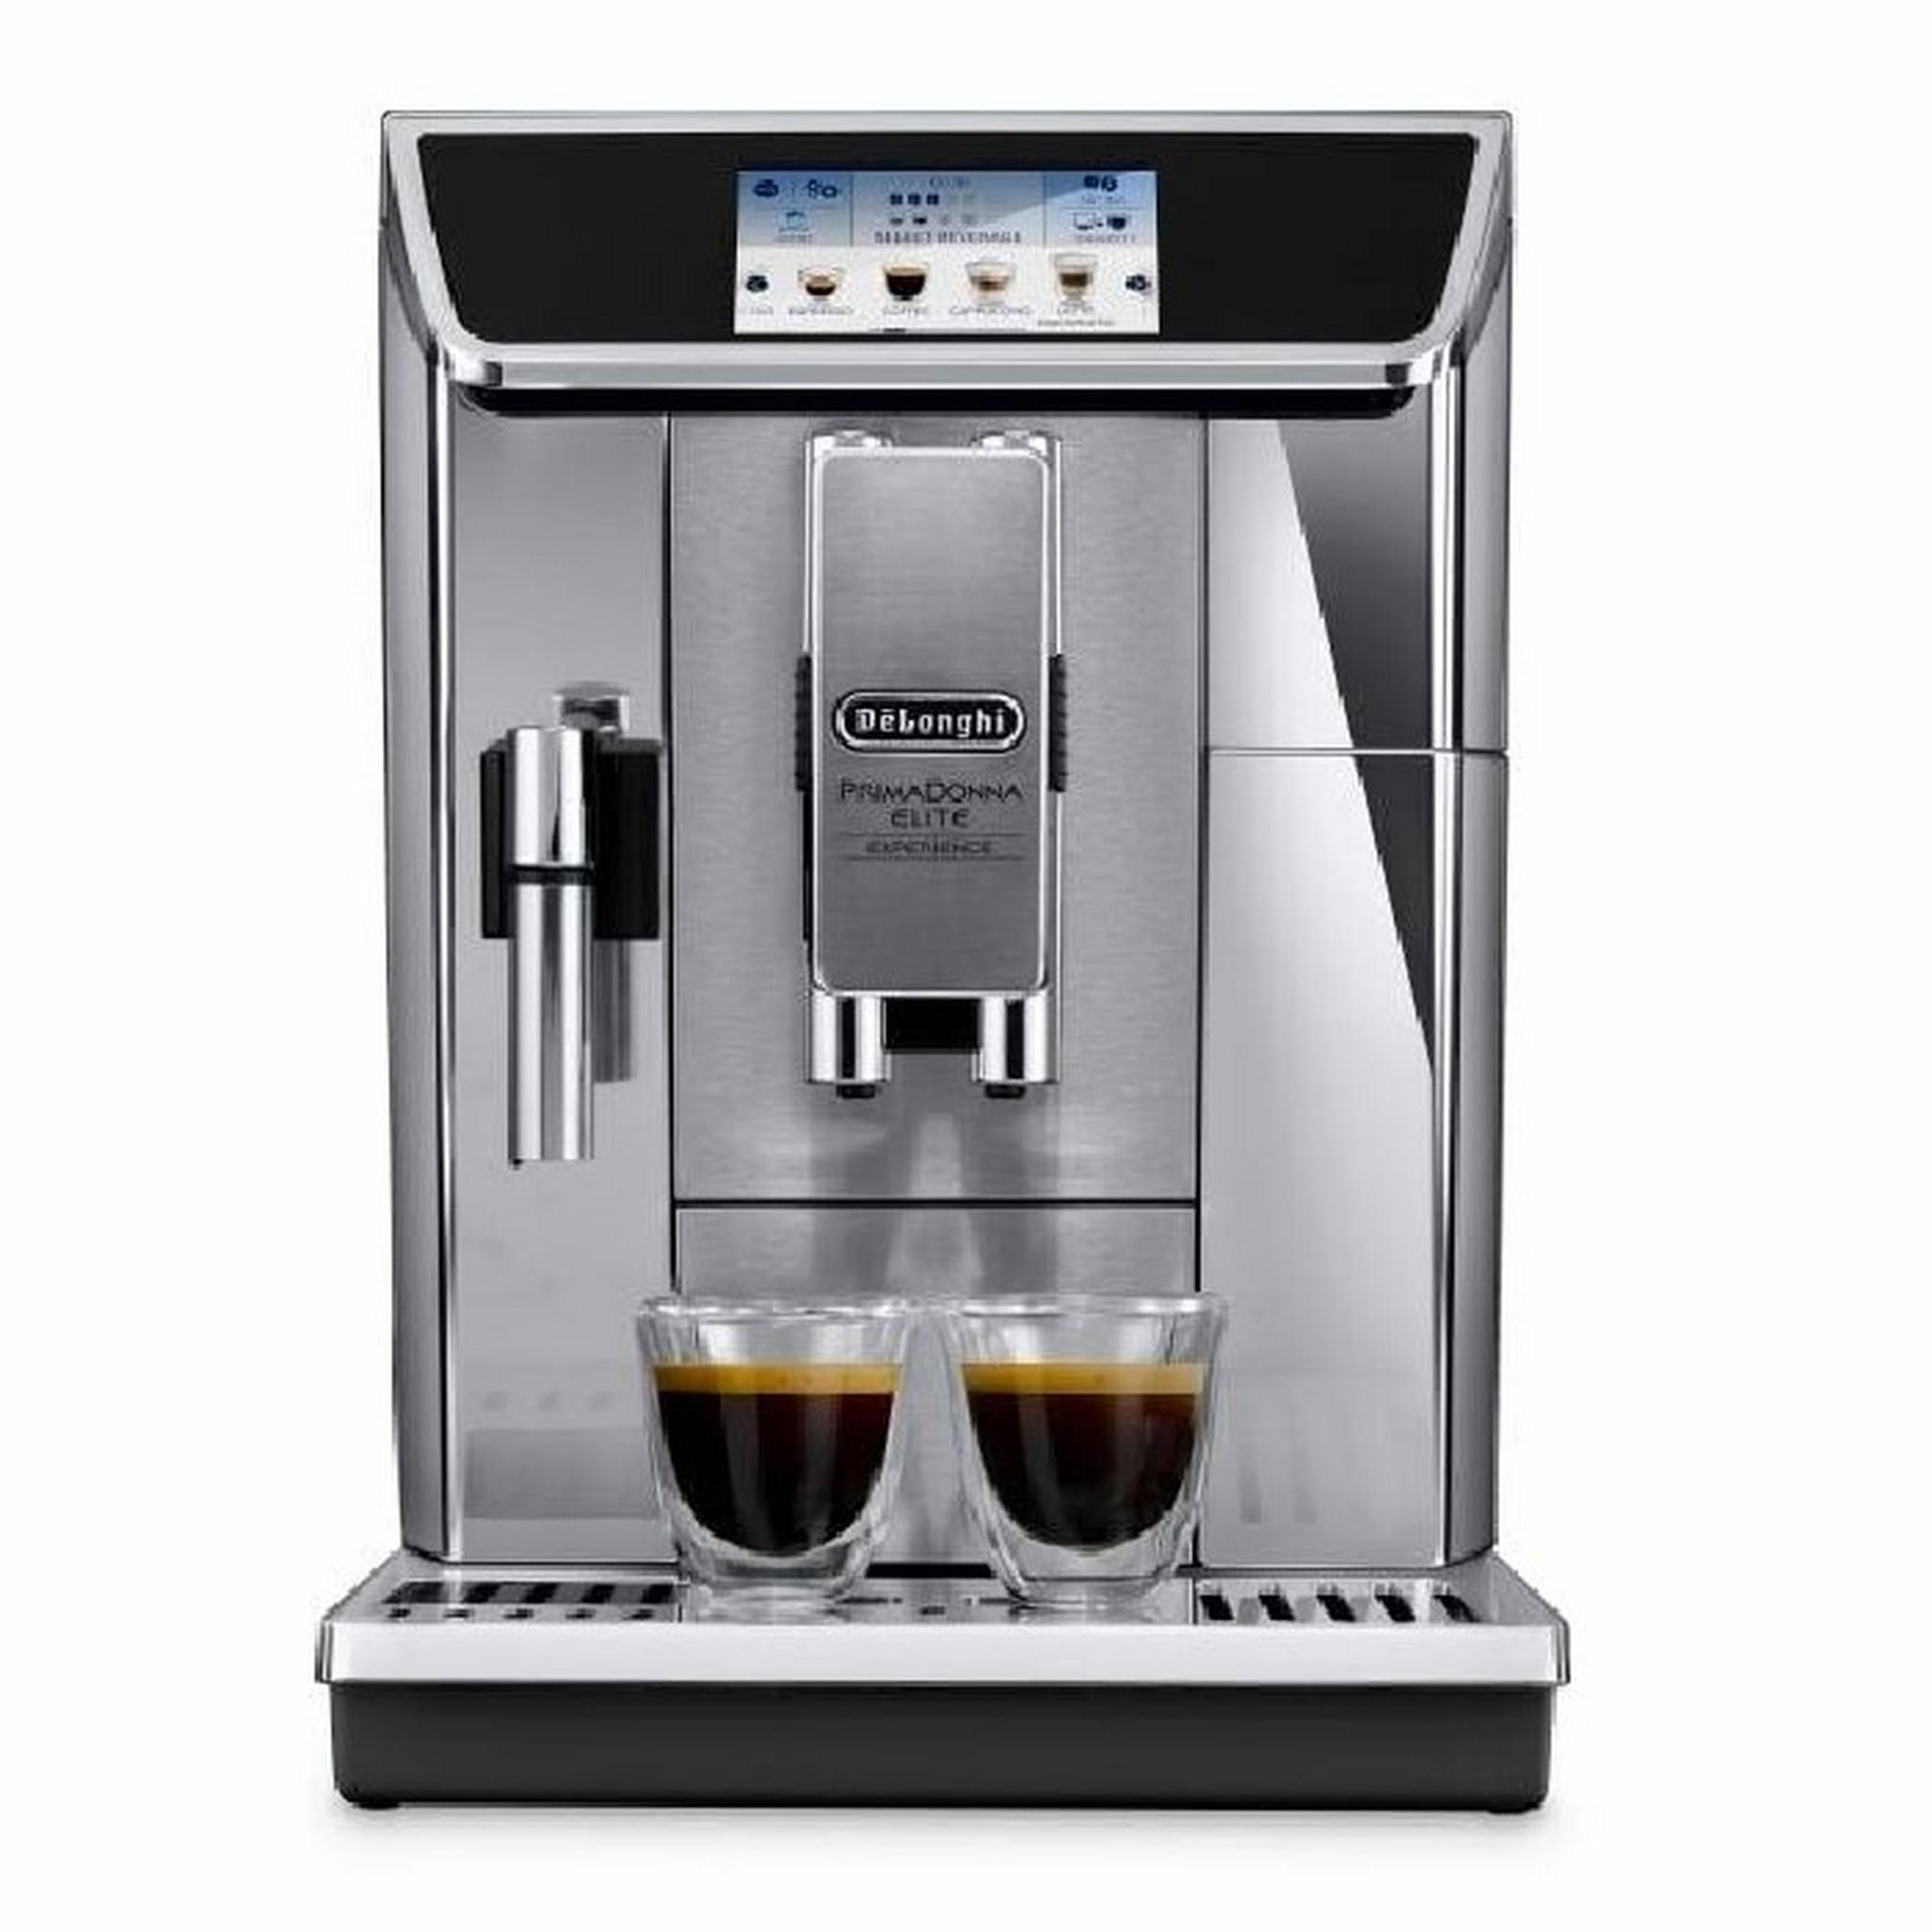 Delonghi Elite Coffee Machine, 1450 W, 1 L, DLECAM650.85MS - Stainless Steel